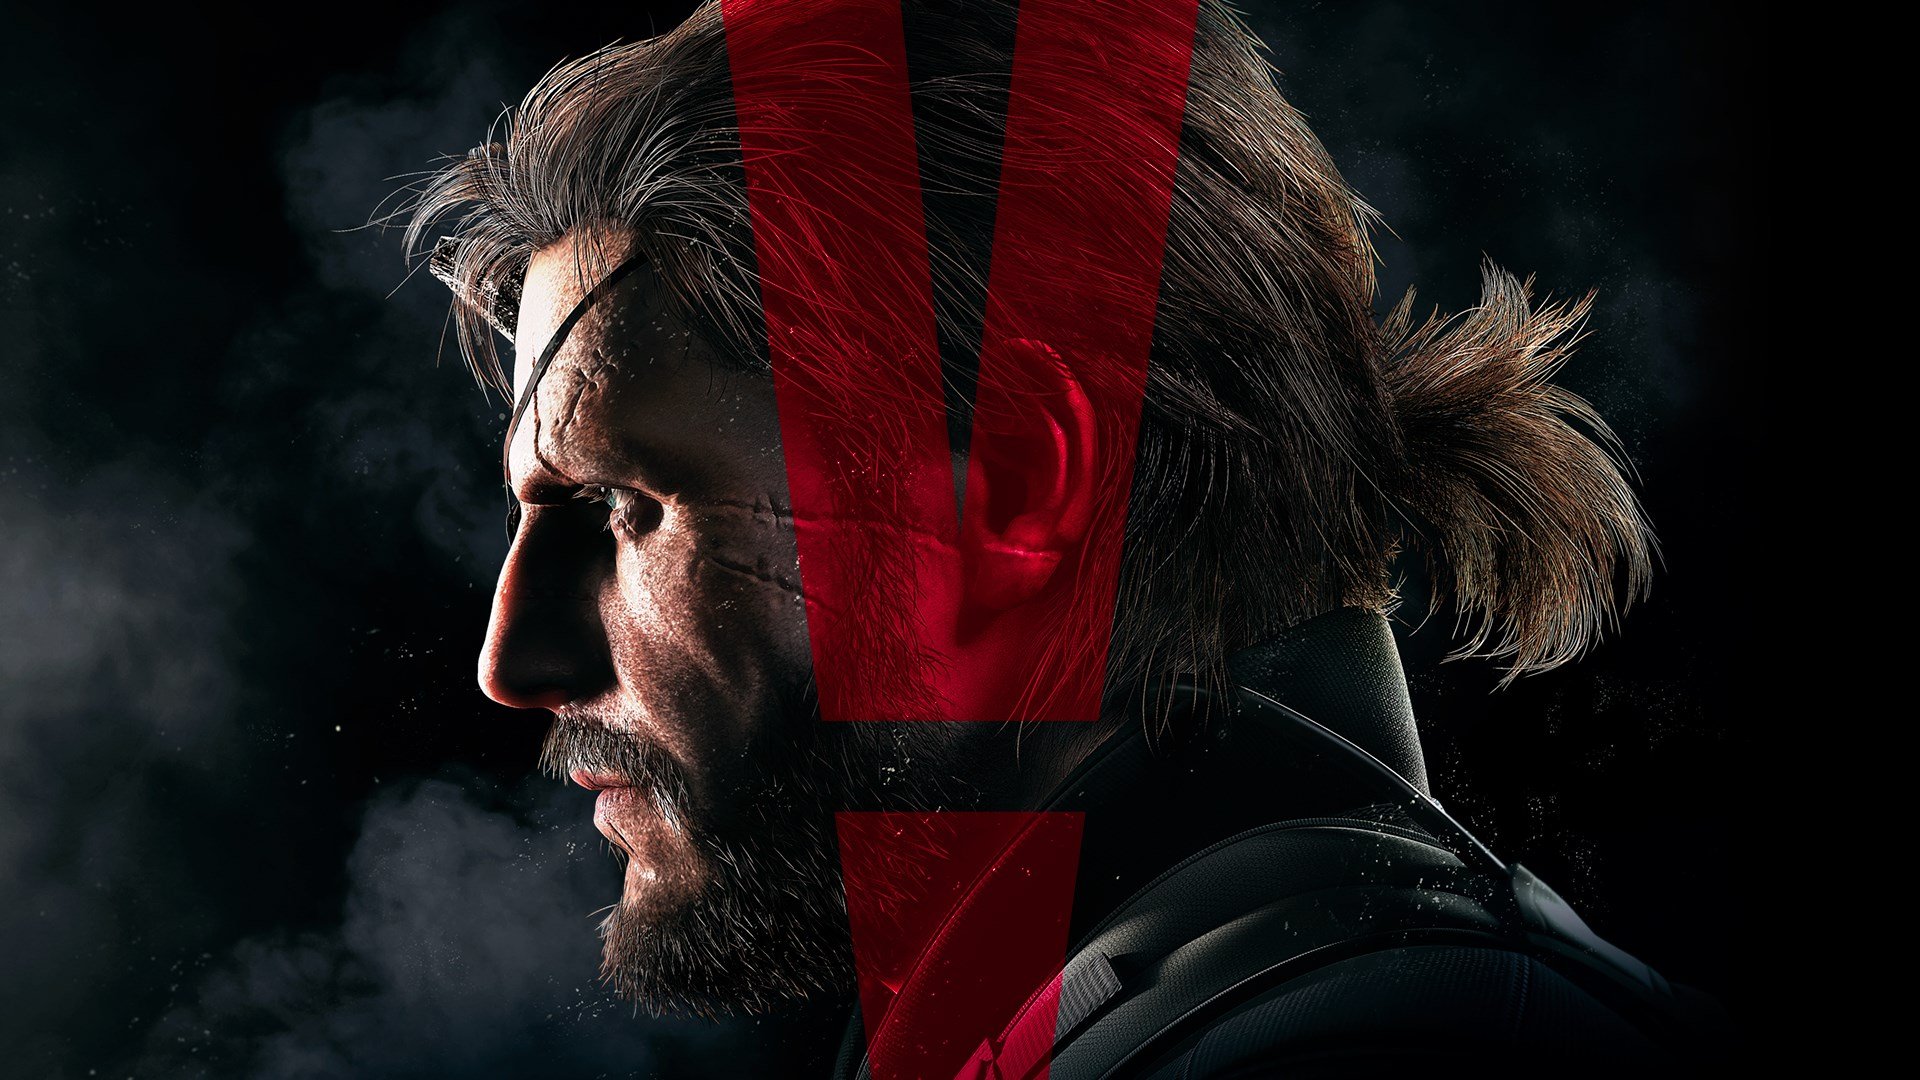 METAL GEAR SOLID V: THE PHANTOM PAIN cover image